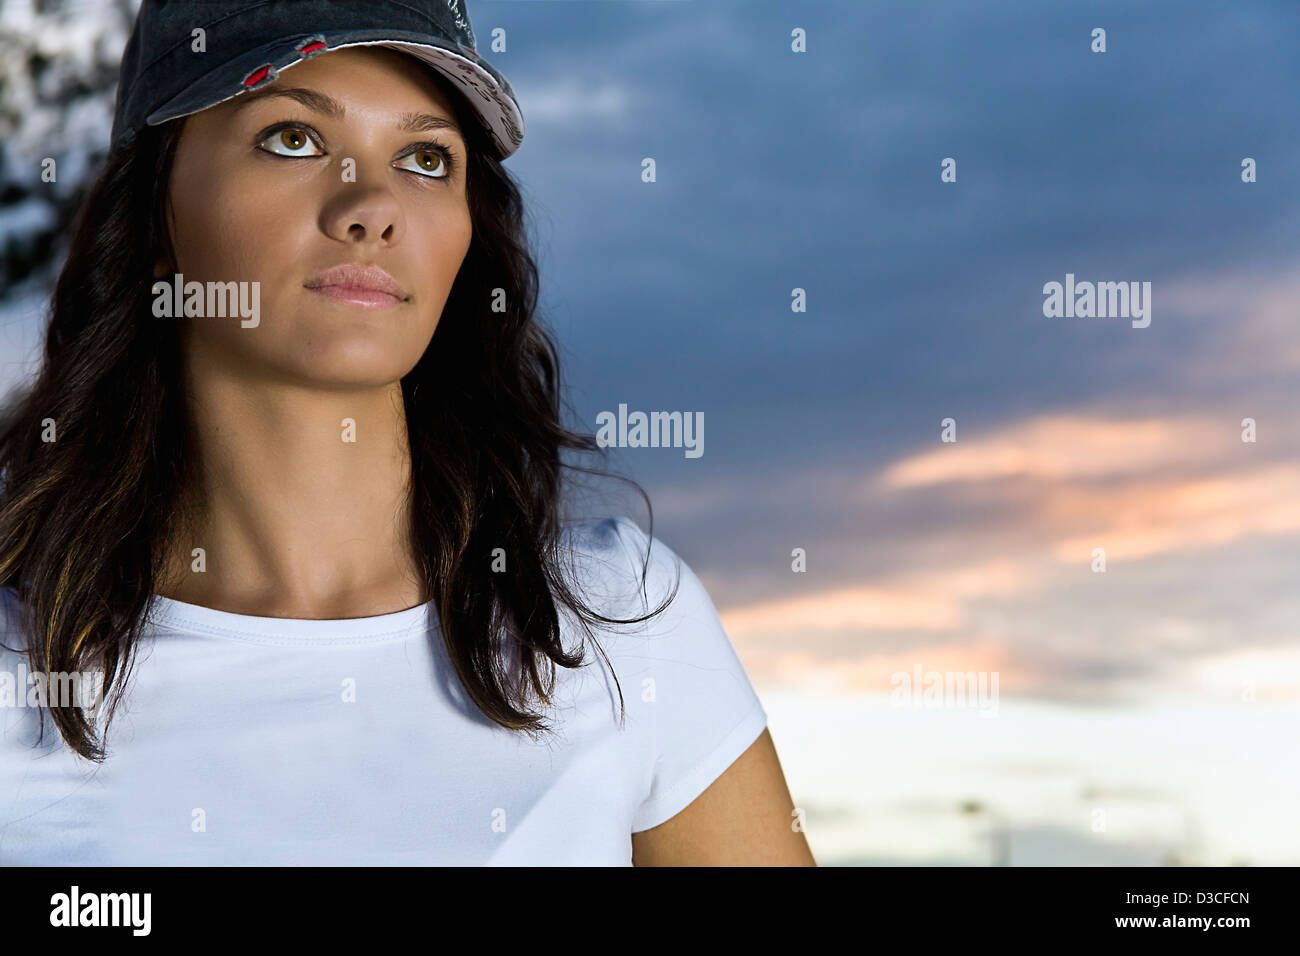 Young woman model looking into distance Stock Photo